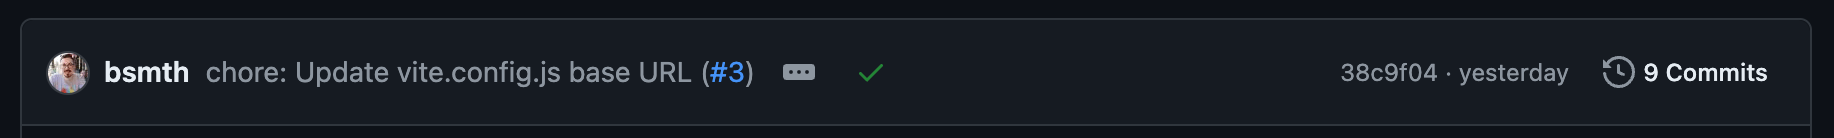 GitHub screenshot showing a green tick next to a commit title